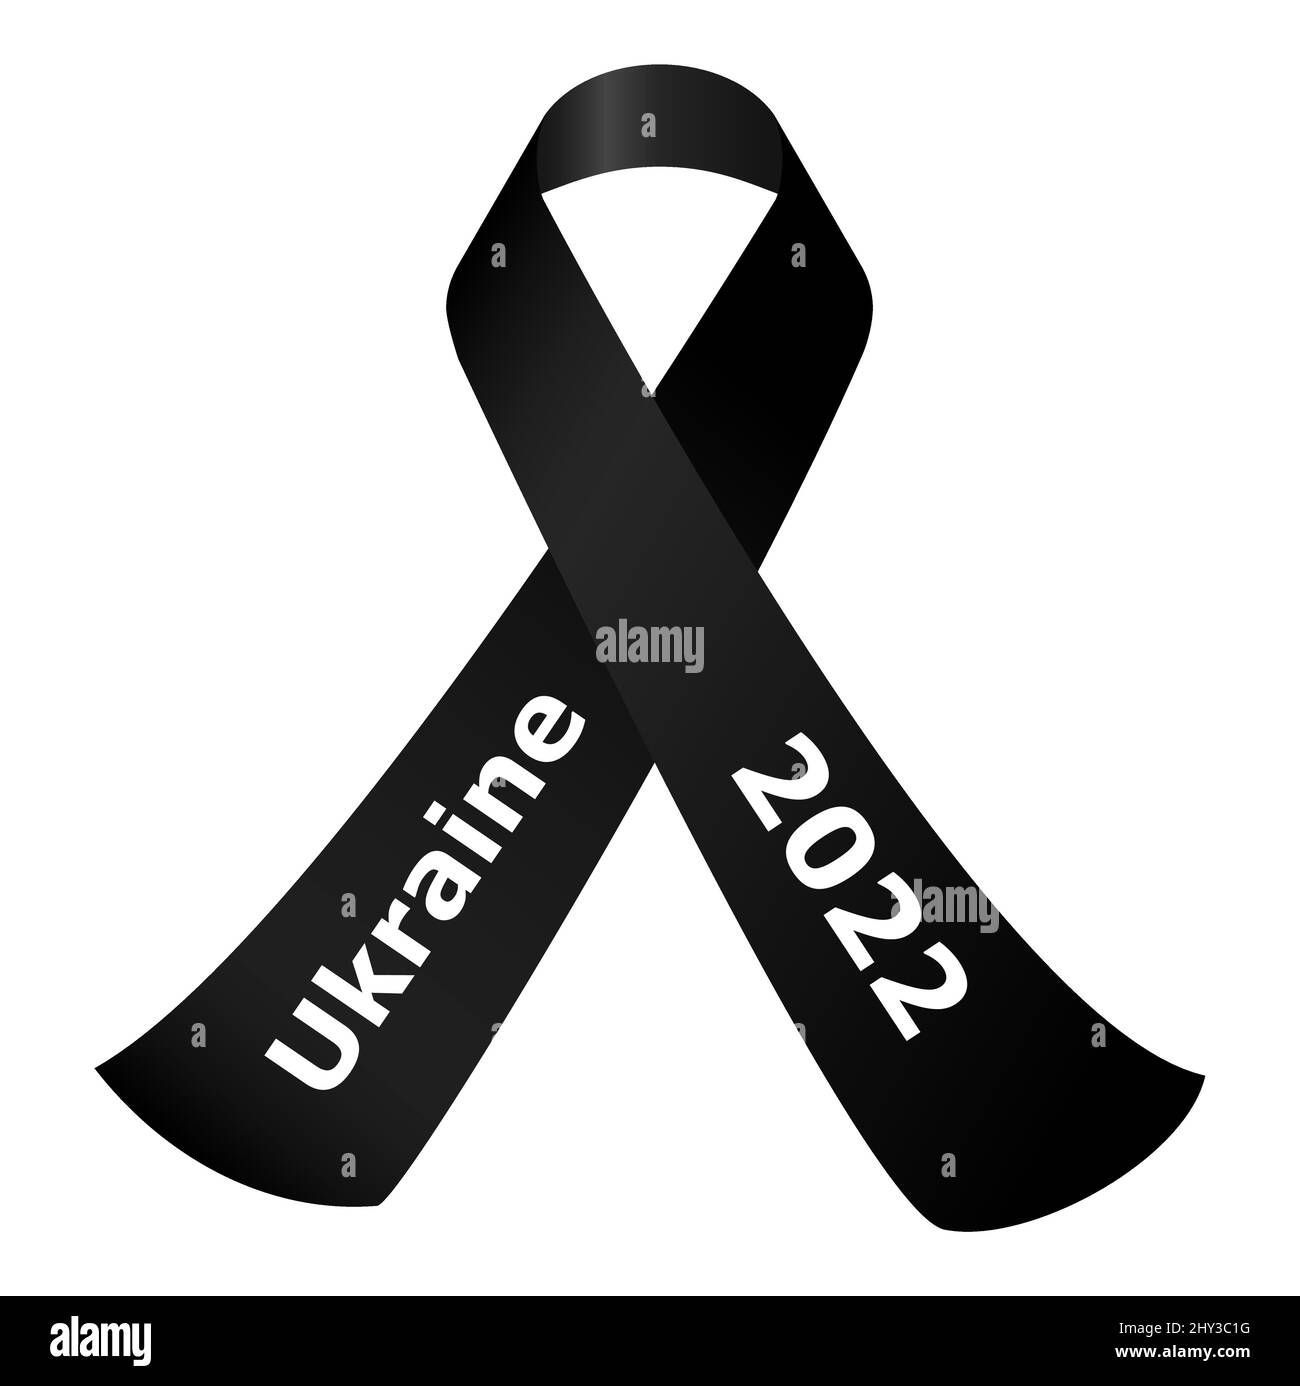 eps vector illustration of black mourning ribbon with text ukraine and 2022 - STOP WAR - conflict with russia 2022 Stock Vector